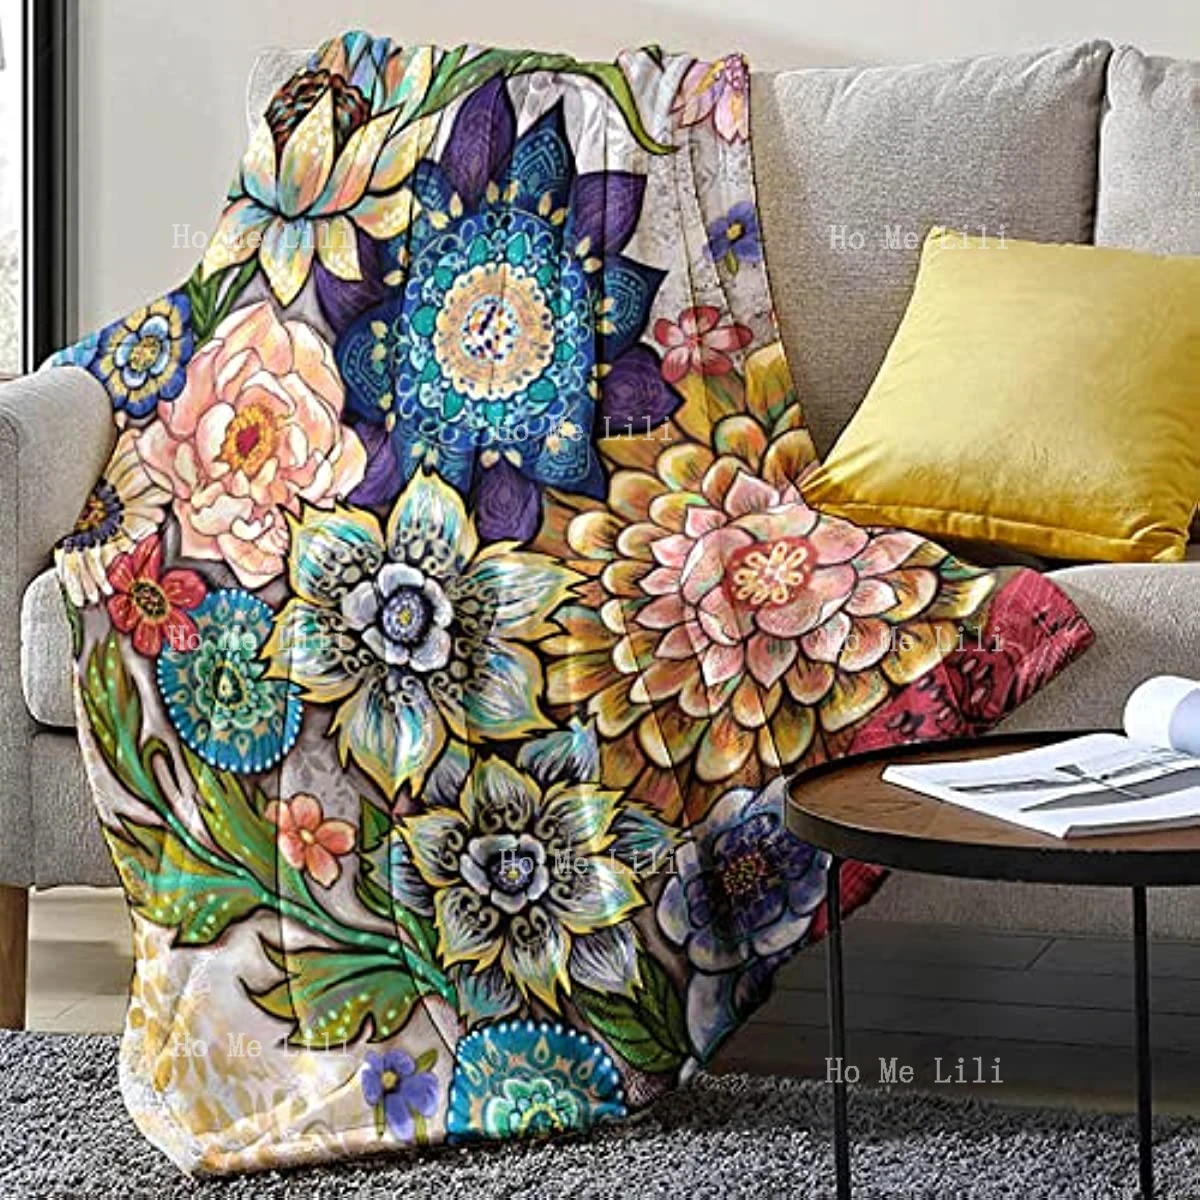 

Floral Throw Blanket, Vibrant Color Boho Flowers Blossom Cozy Decor Throws for Sofa Bed Couch Chair or Dorm